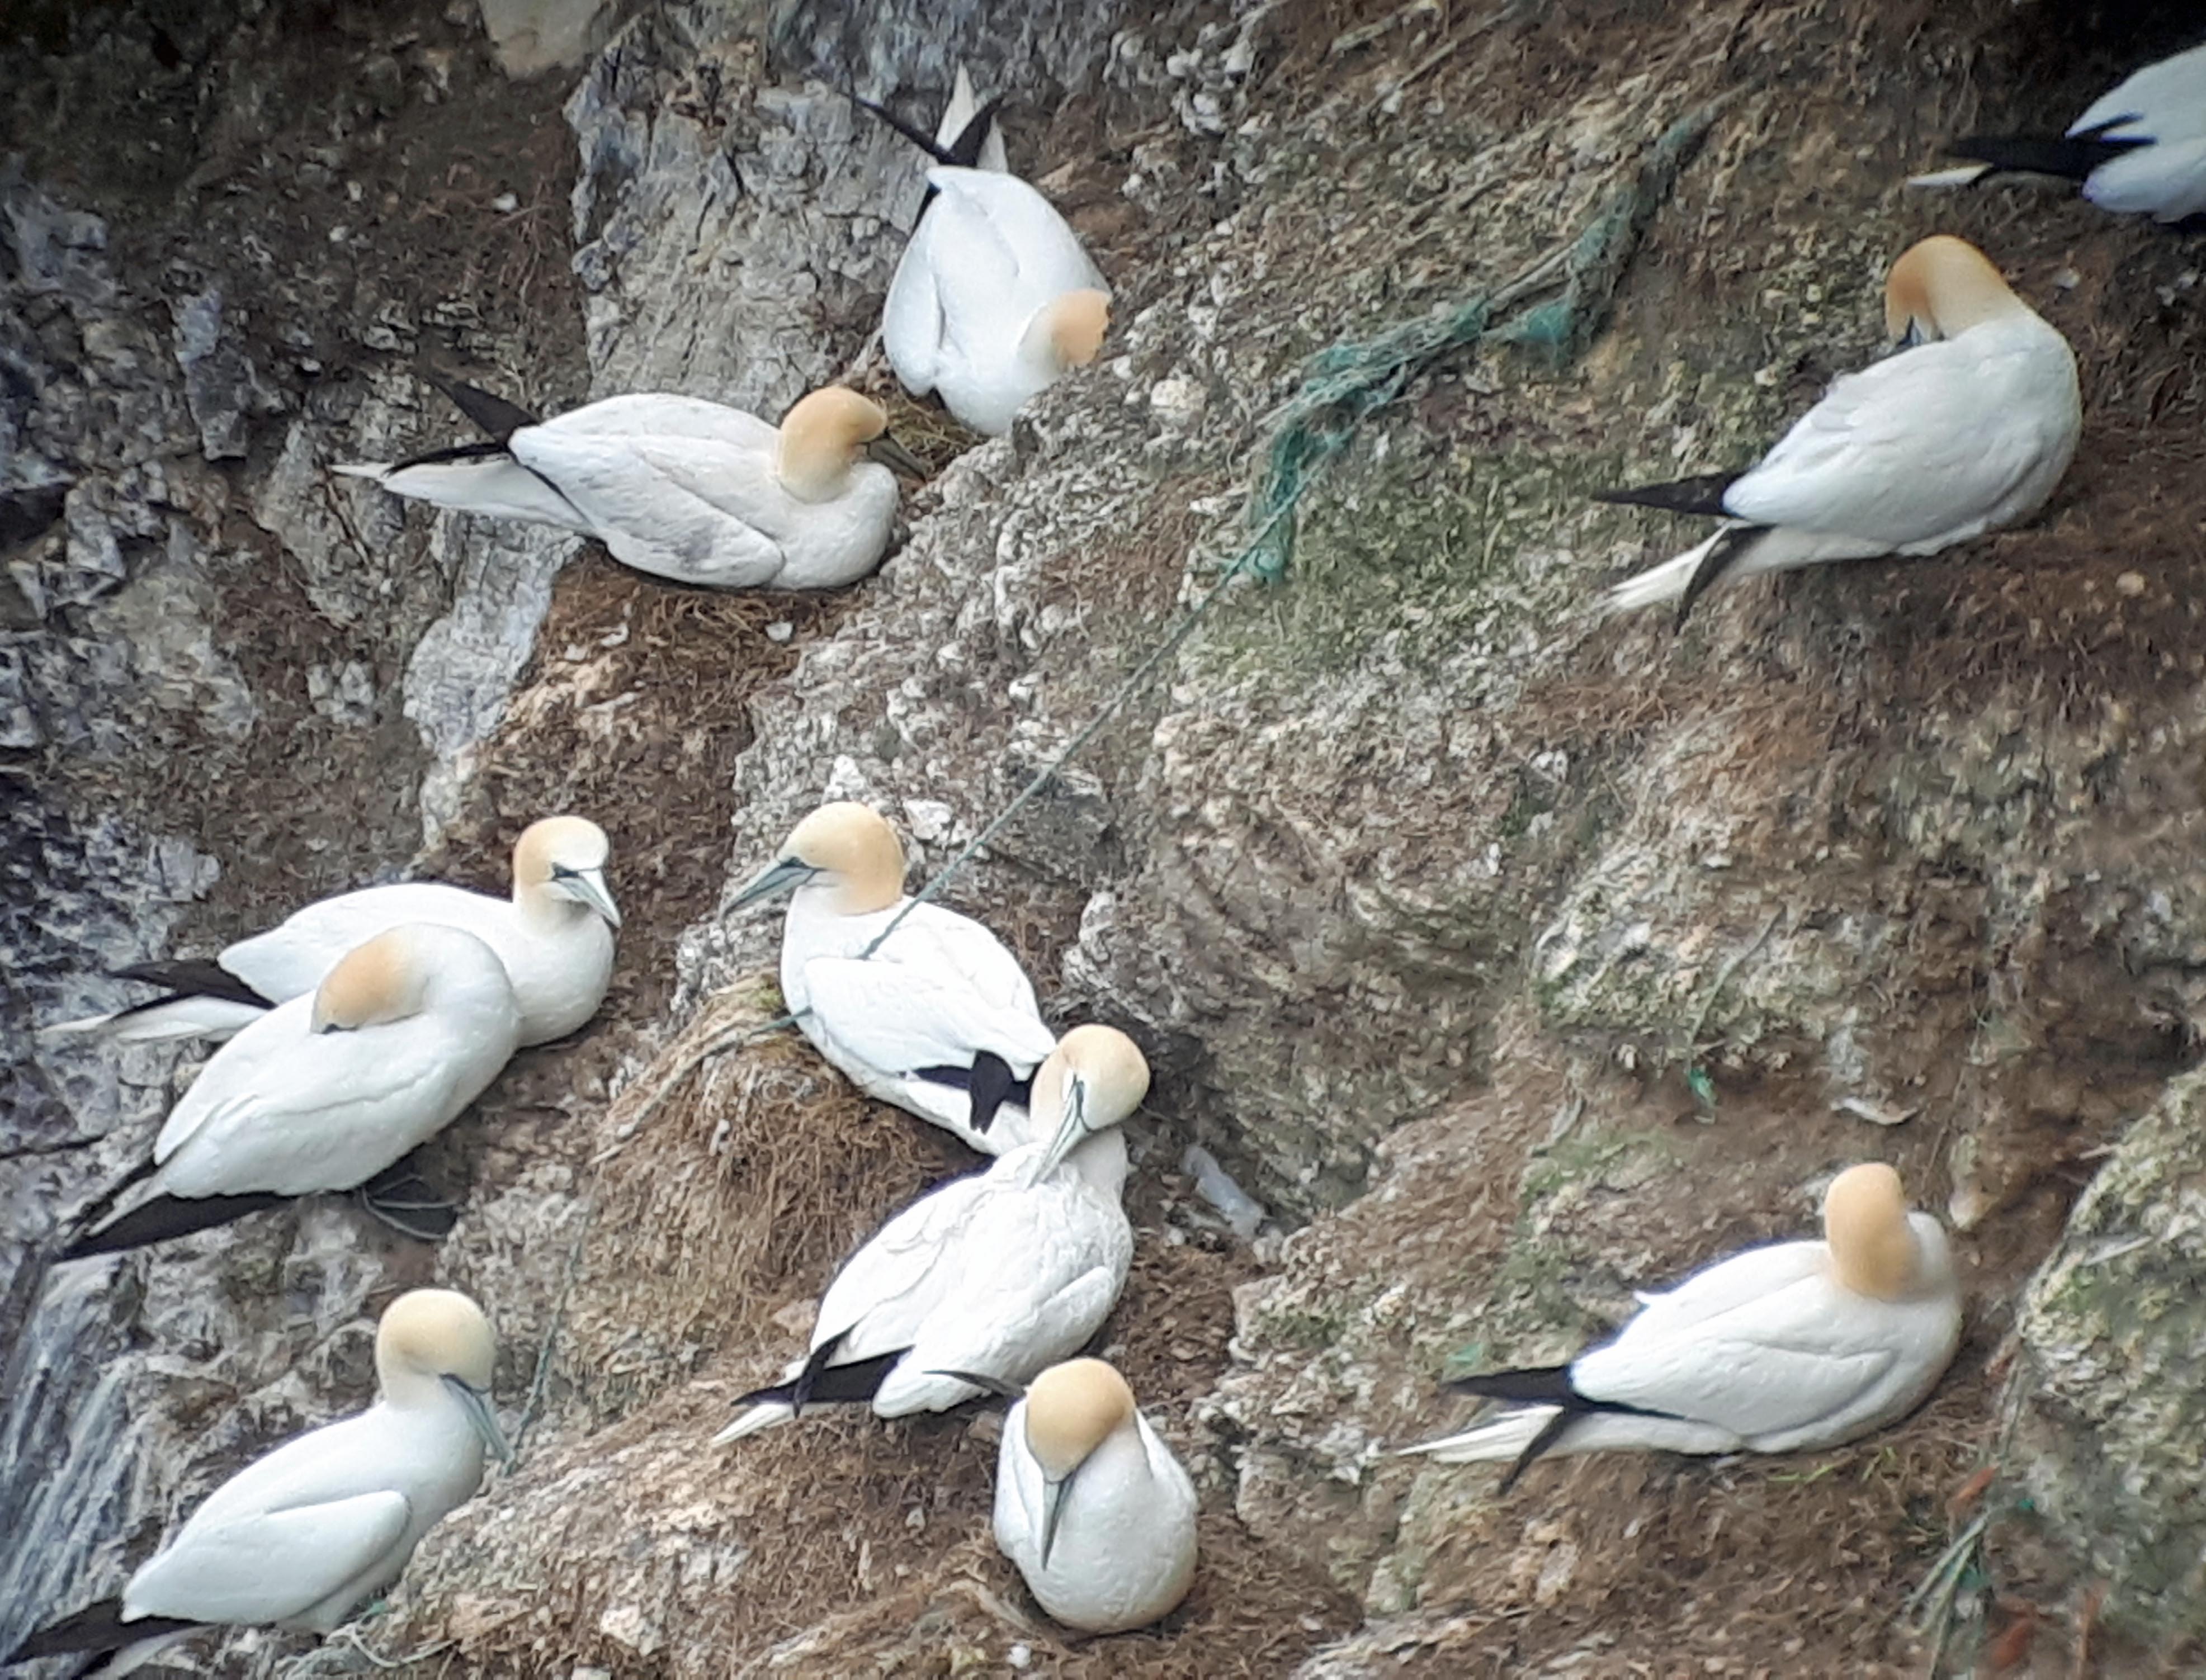 New study highlights prevalence of plastic pollution in gannet nests